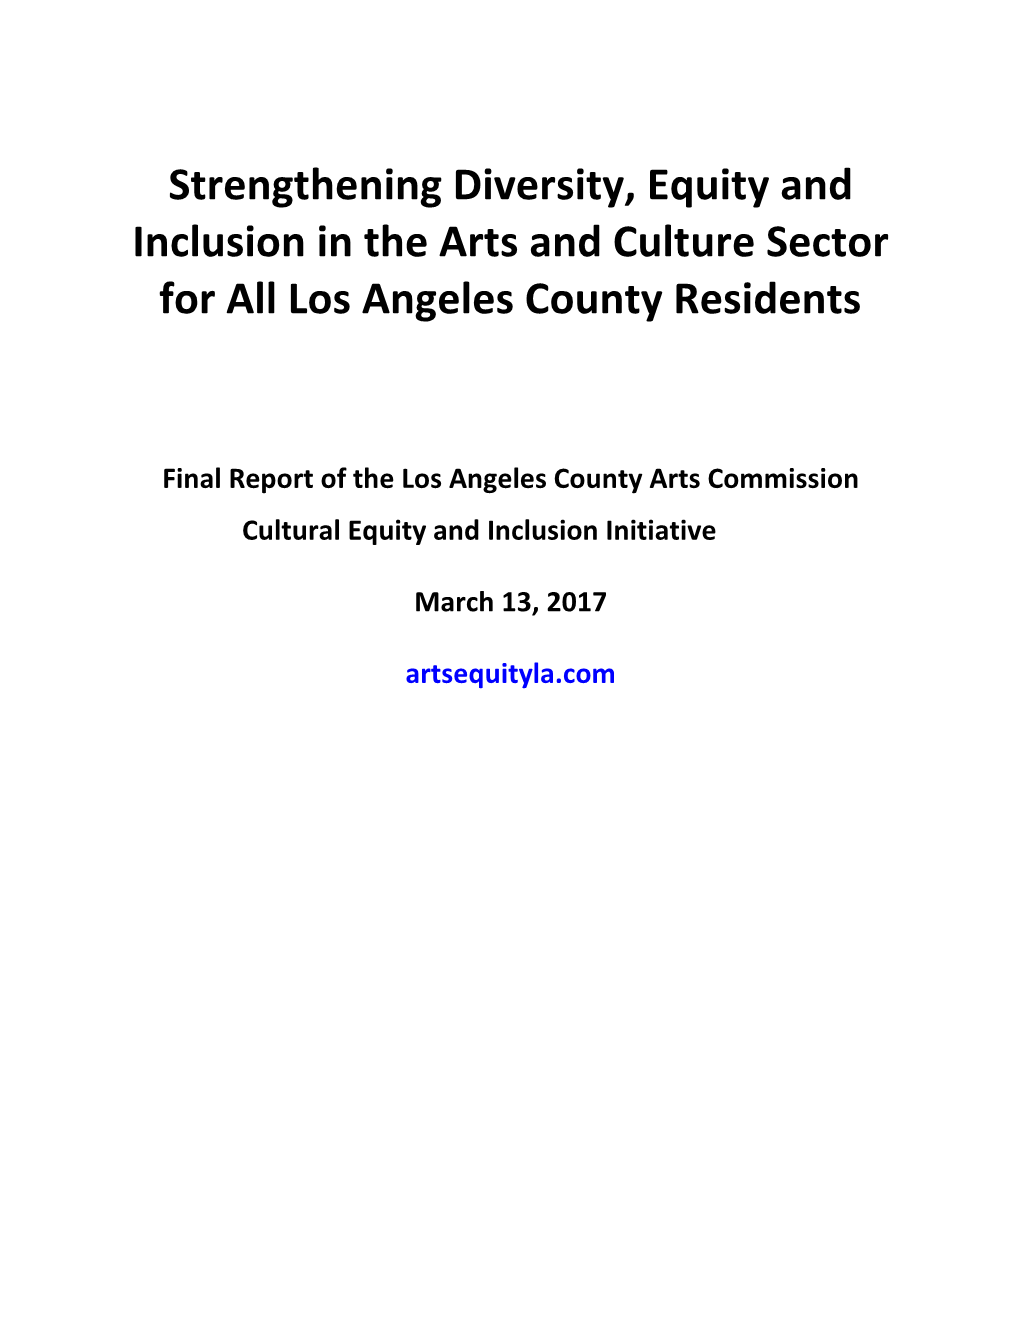 Strengthening Diversity, Equity and Inclusion in the Arts and Culture Sector for All Los Angeles County Residents